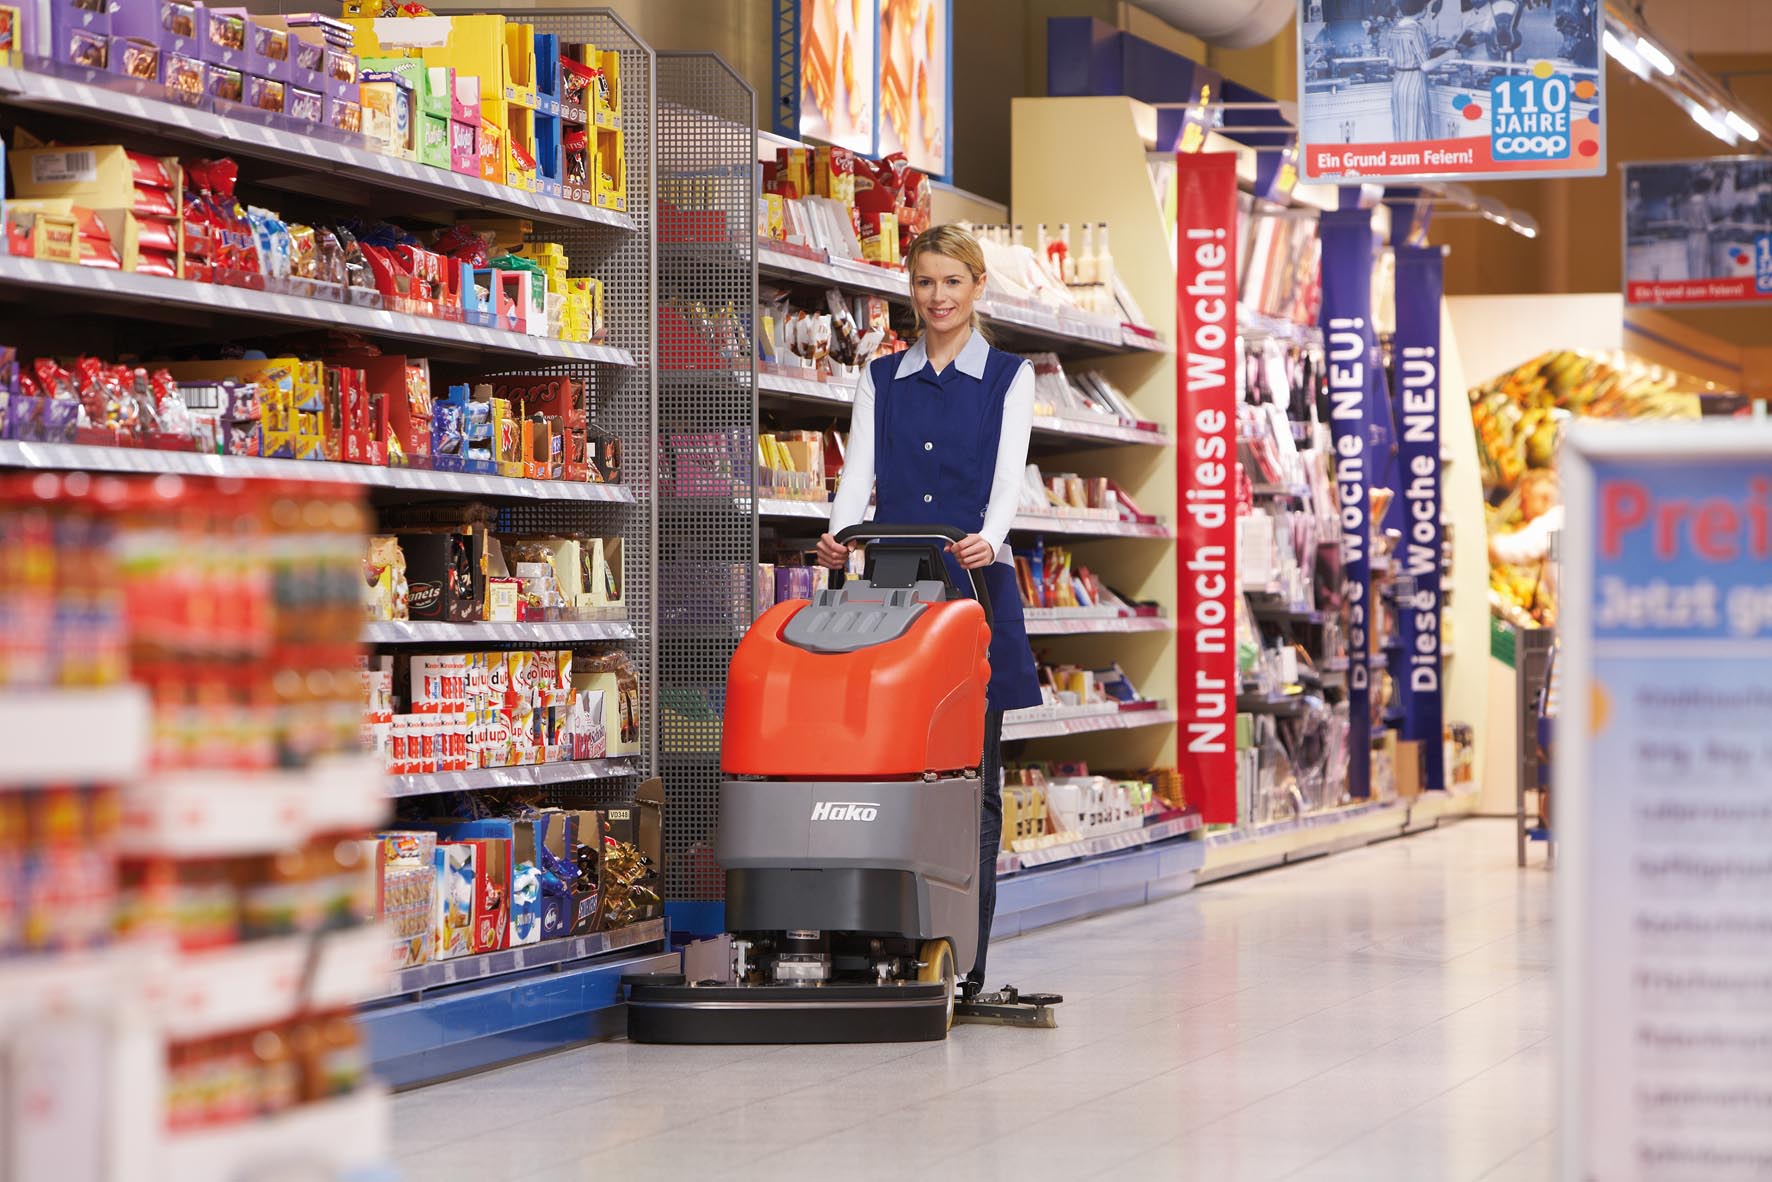 compact walk-behind scrubber-drier Scrubmaster B45 equipped with a brush unit